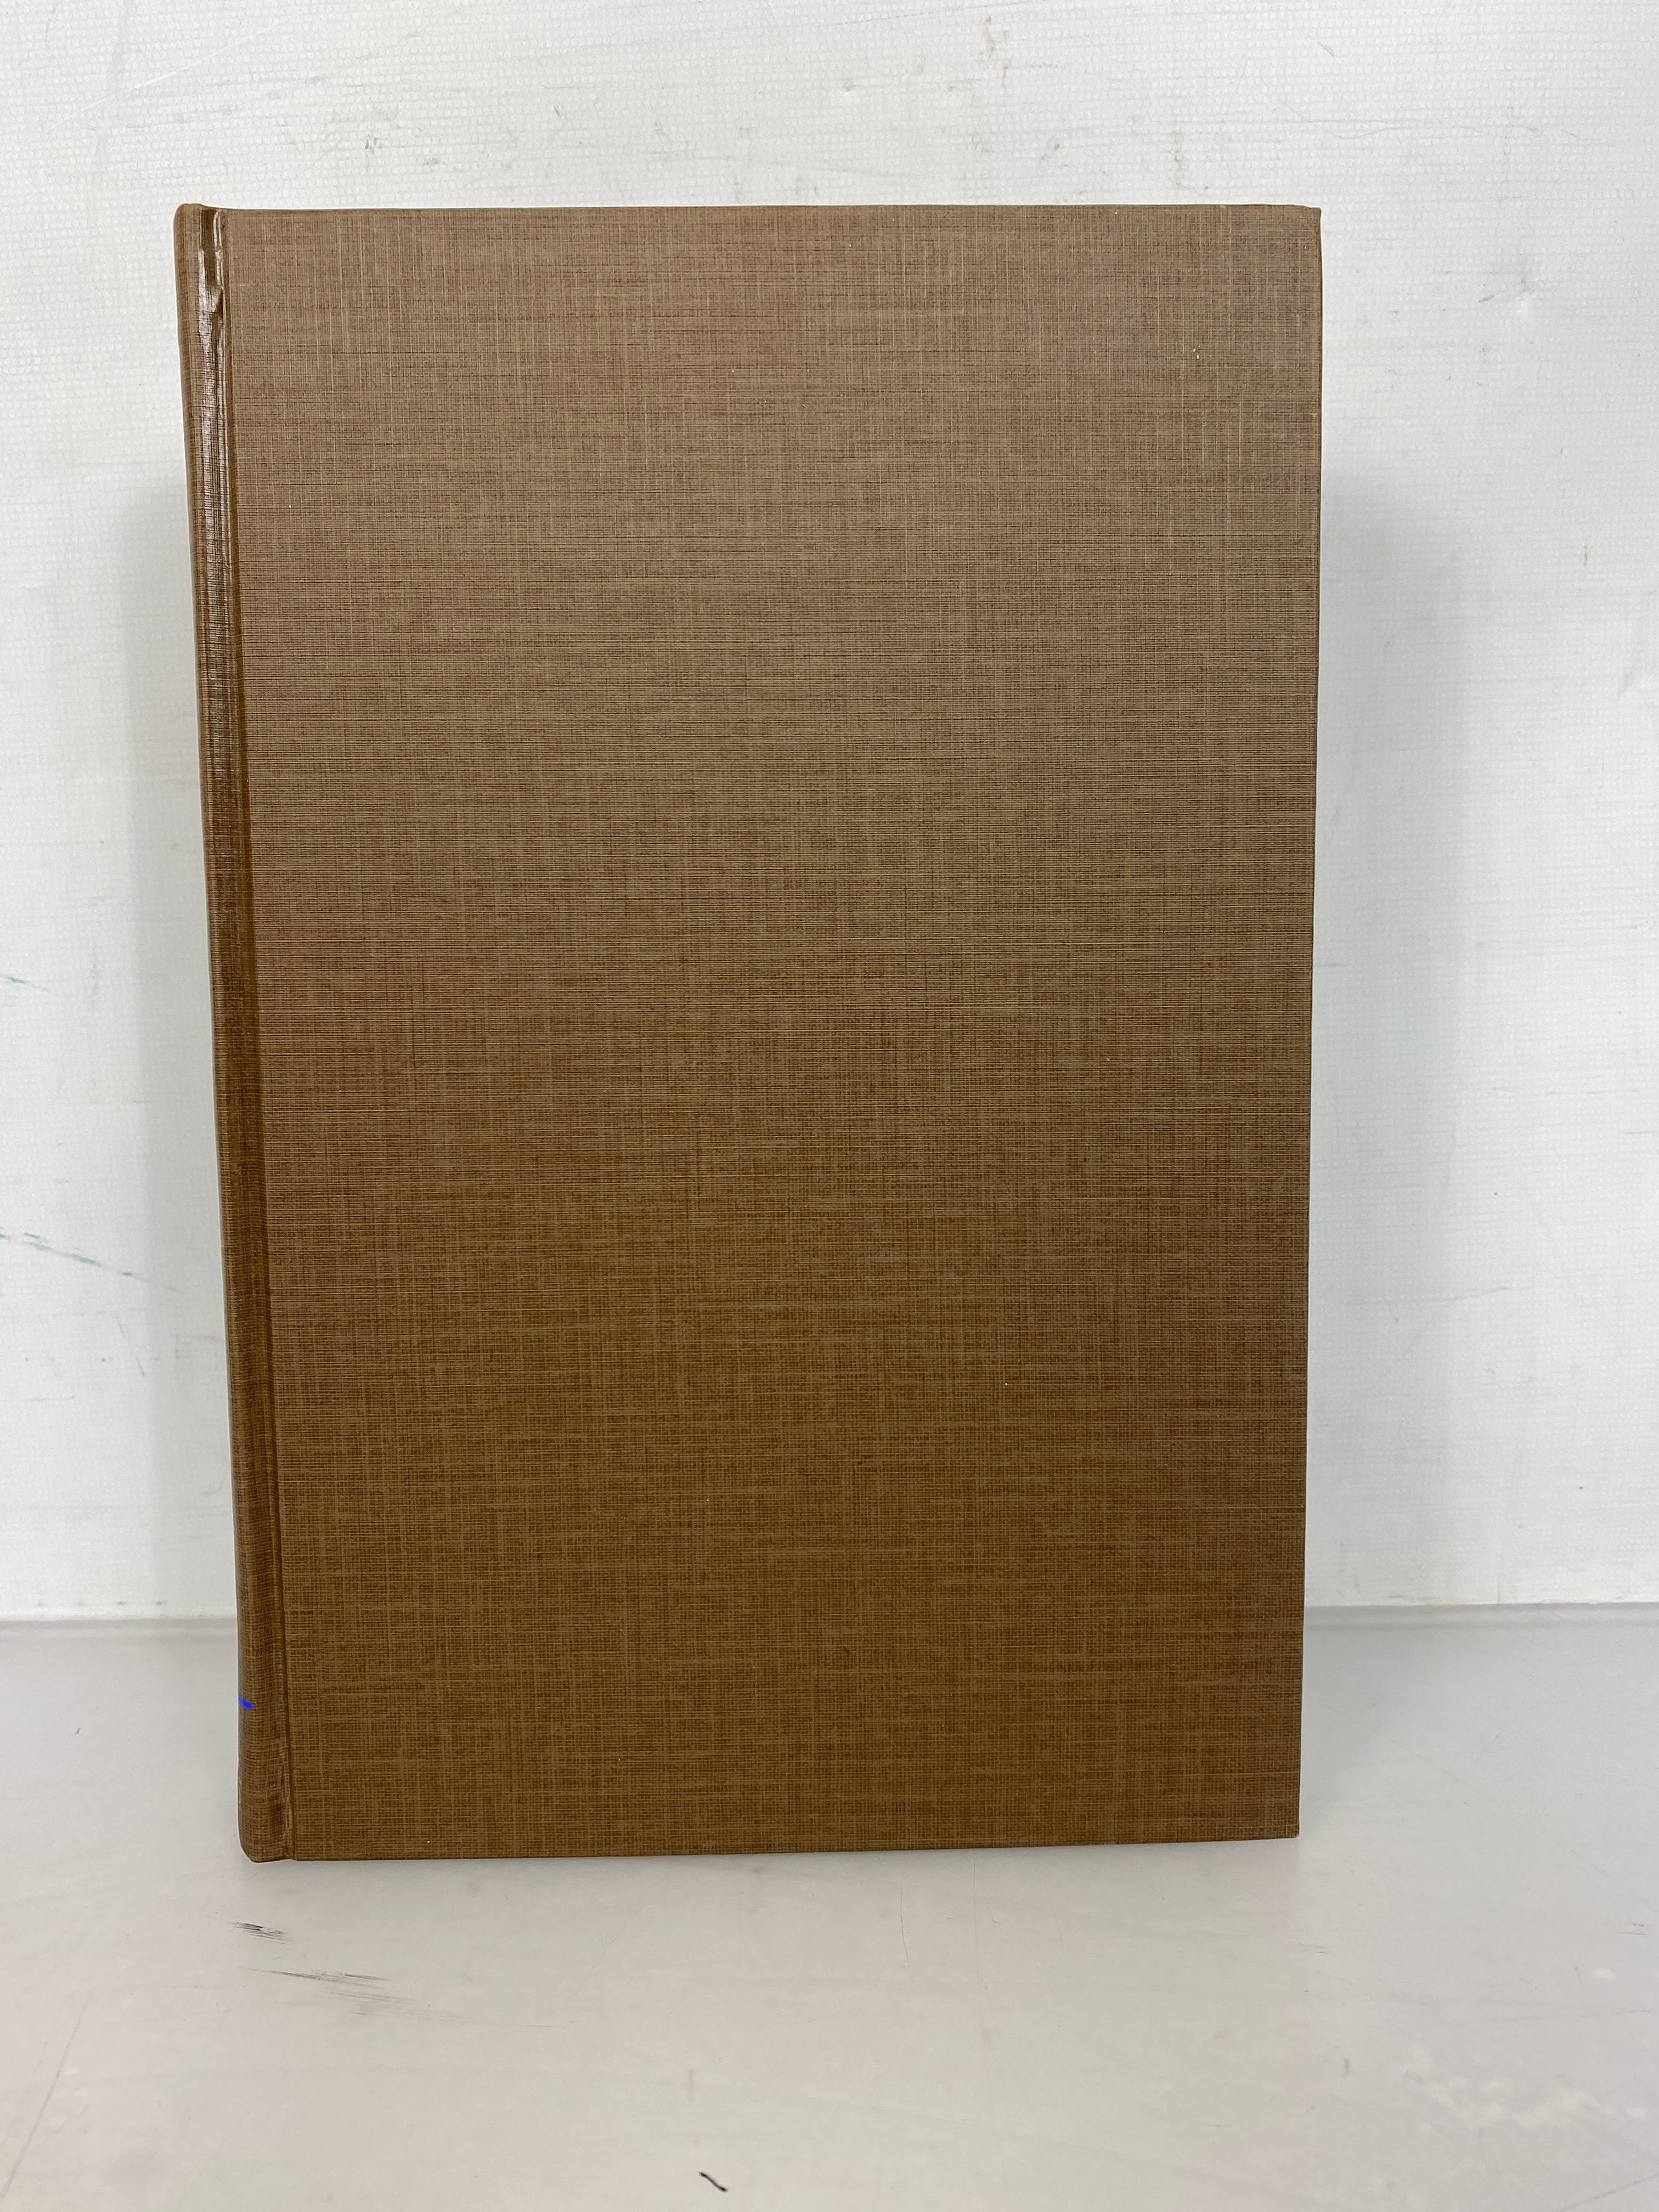 Theory of Psychoanalytic Technique by Menninger and Holzman 1973 Second Edition HC DJ